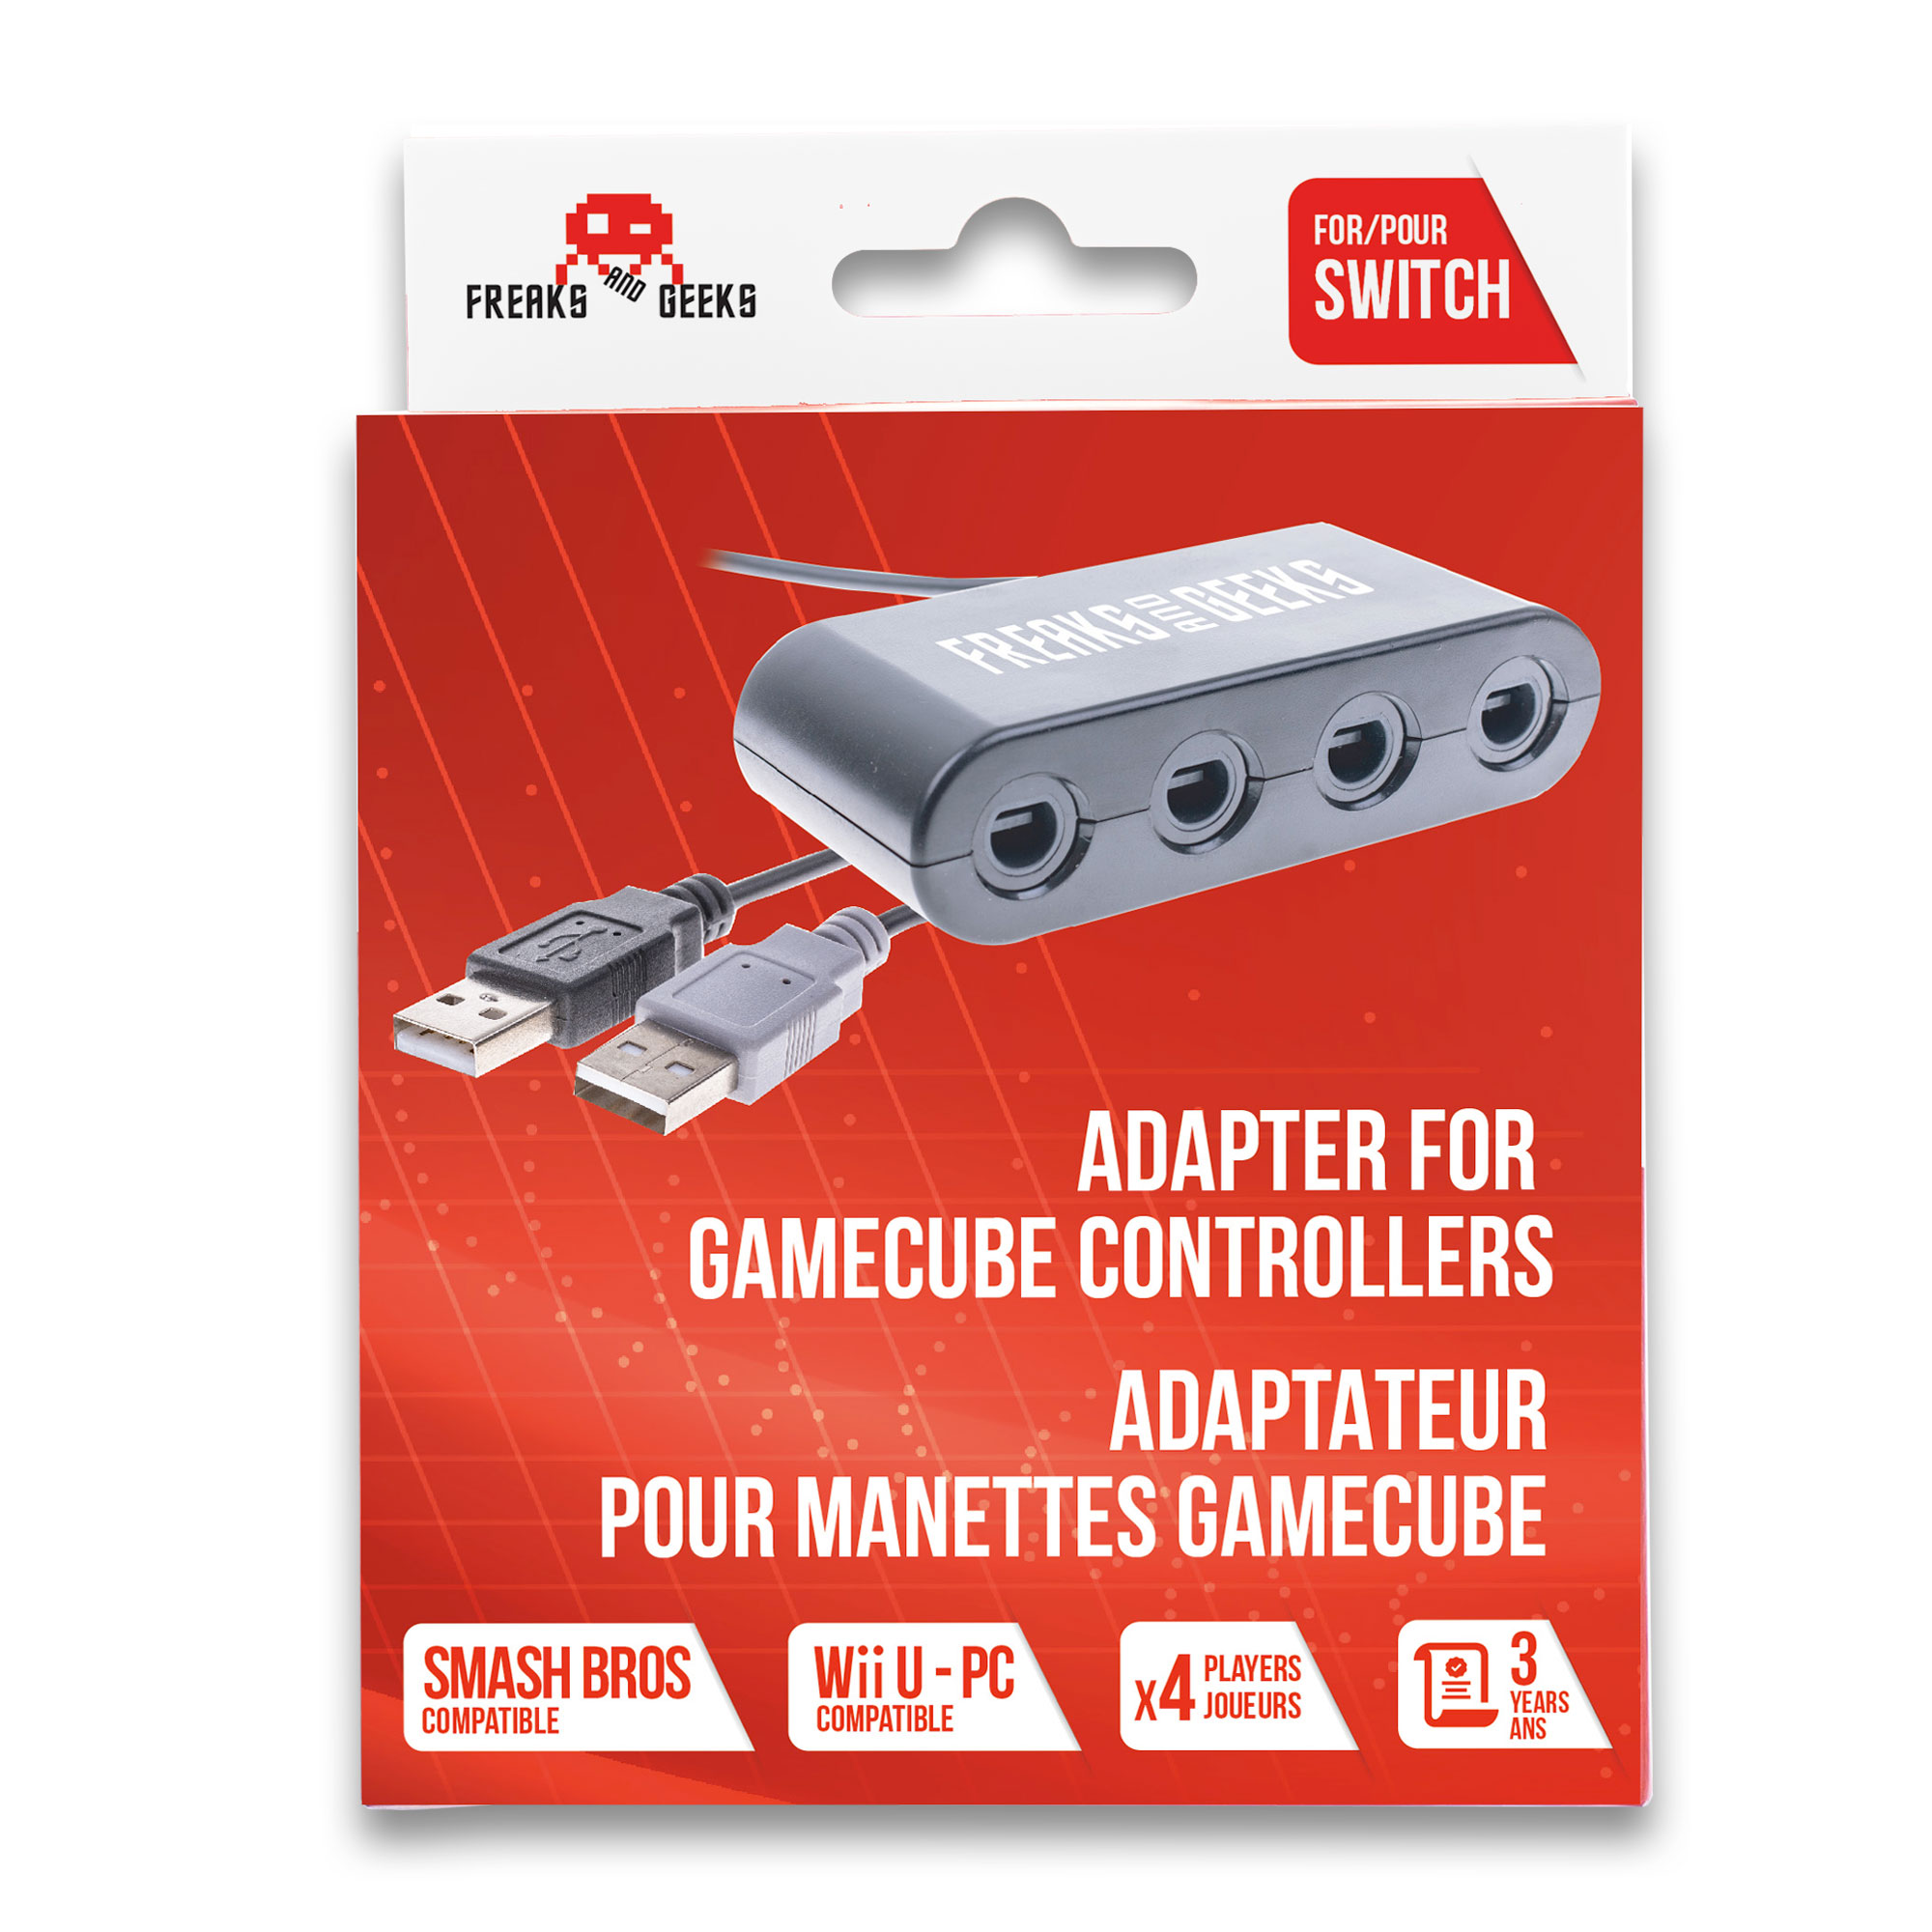 Adaptateur 4 Manettes Game Cube sur SWITCH et Wii U - Freaks and Geeks